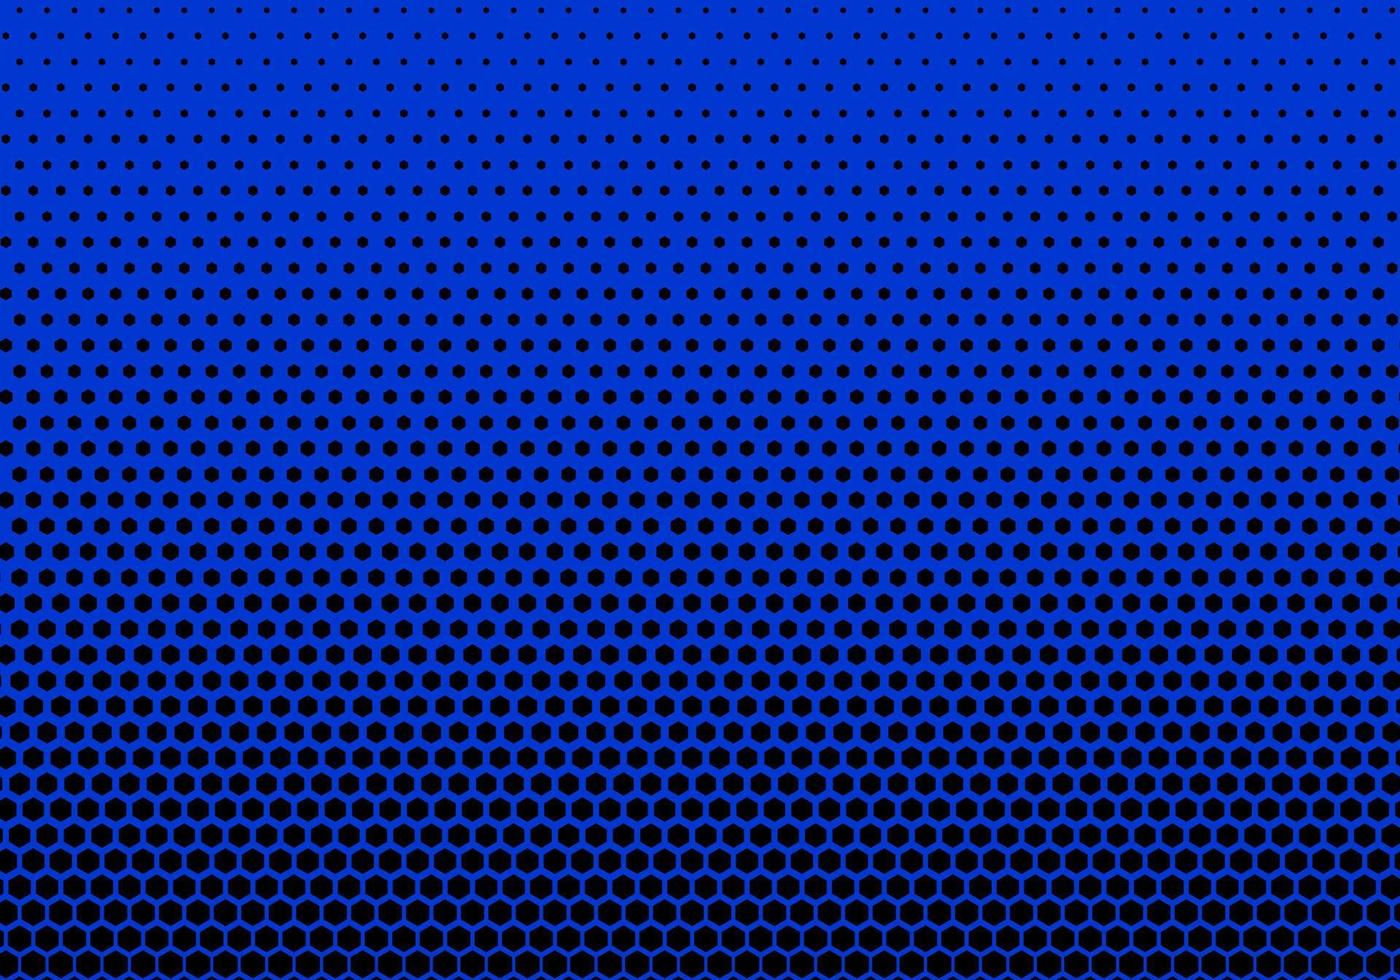 Background geometric uses hexagonal shapes to form a pattern from large to small. blue background Use it as wallpaper or artwork. vector